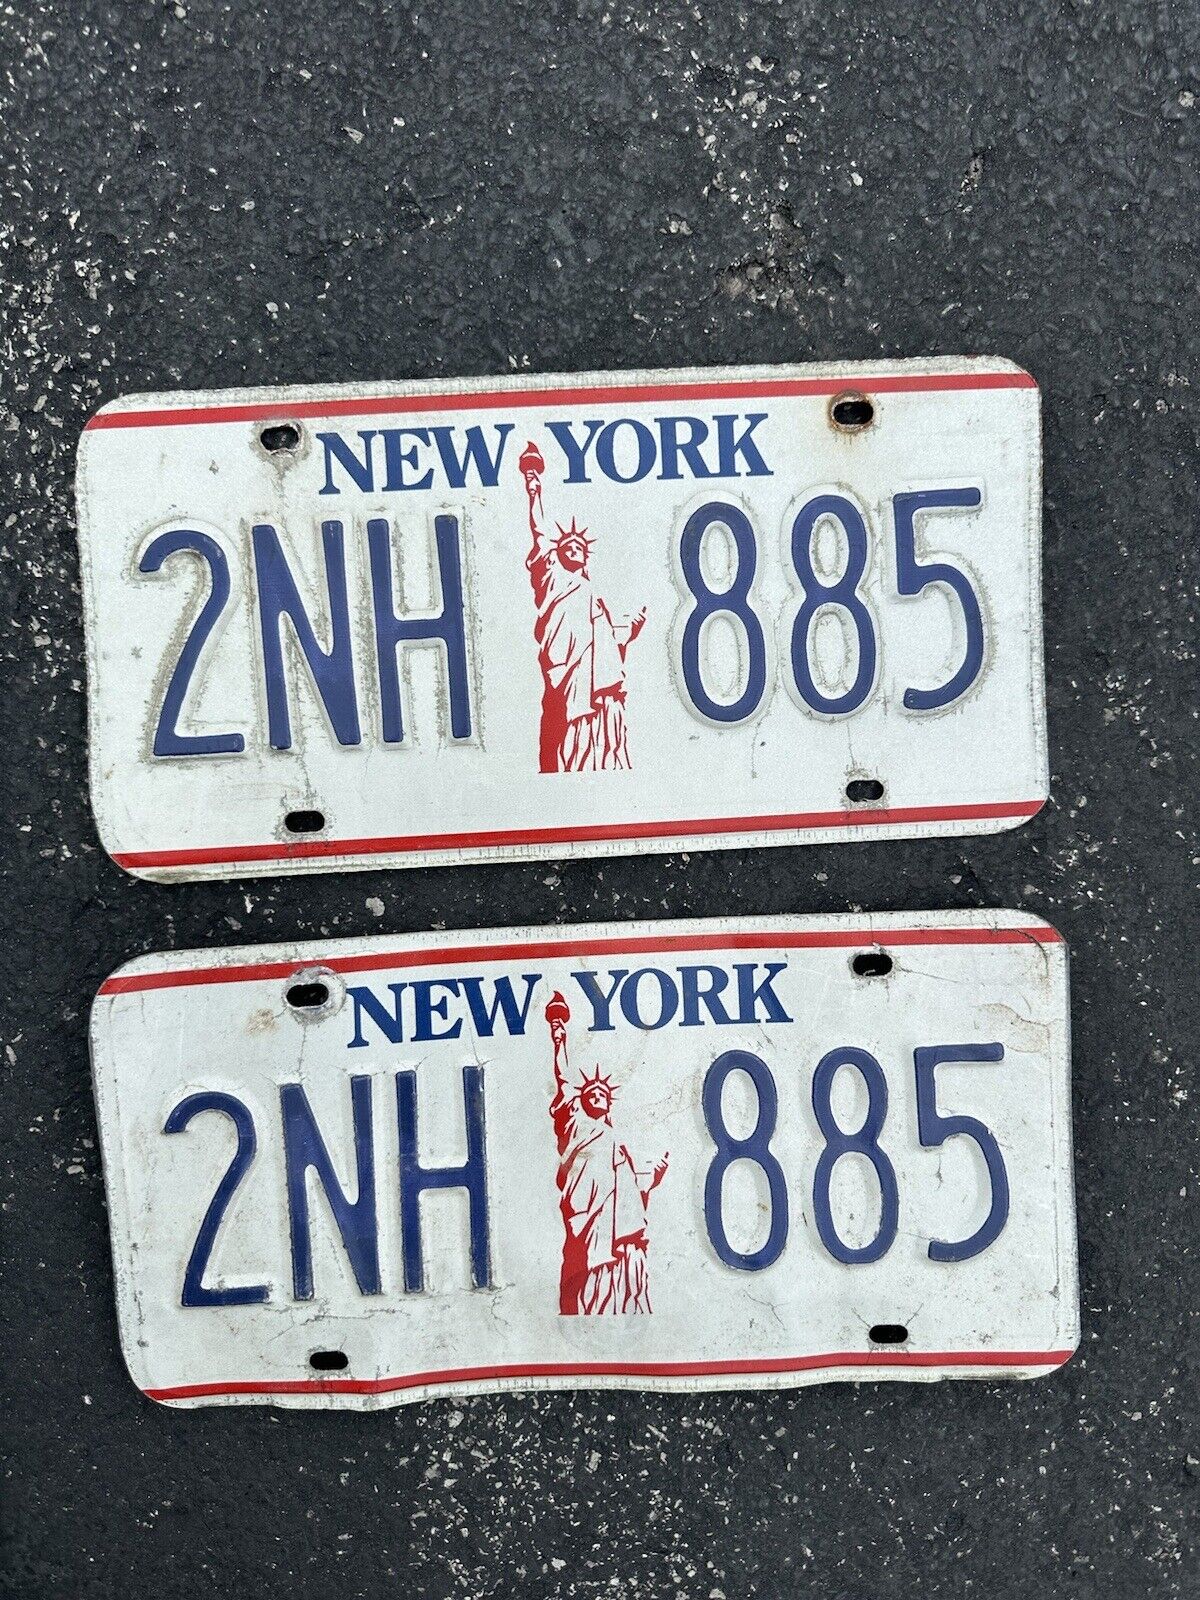 1980s/1990s New York STATUE OF LIBERTY License Plate PAIR  # 2NH 885